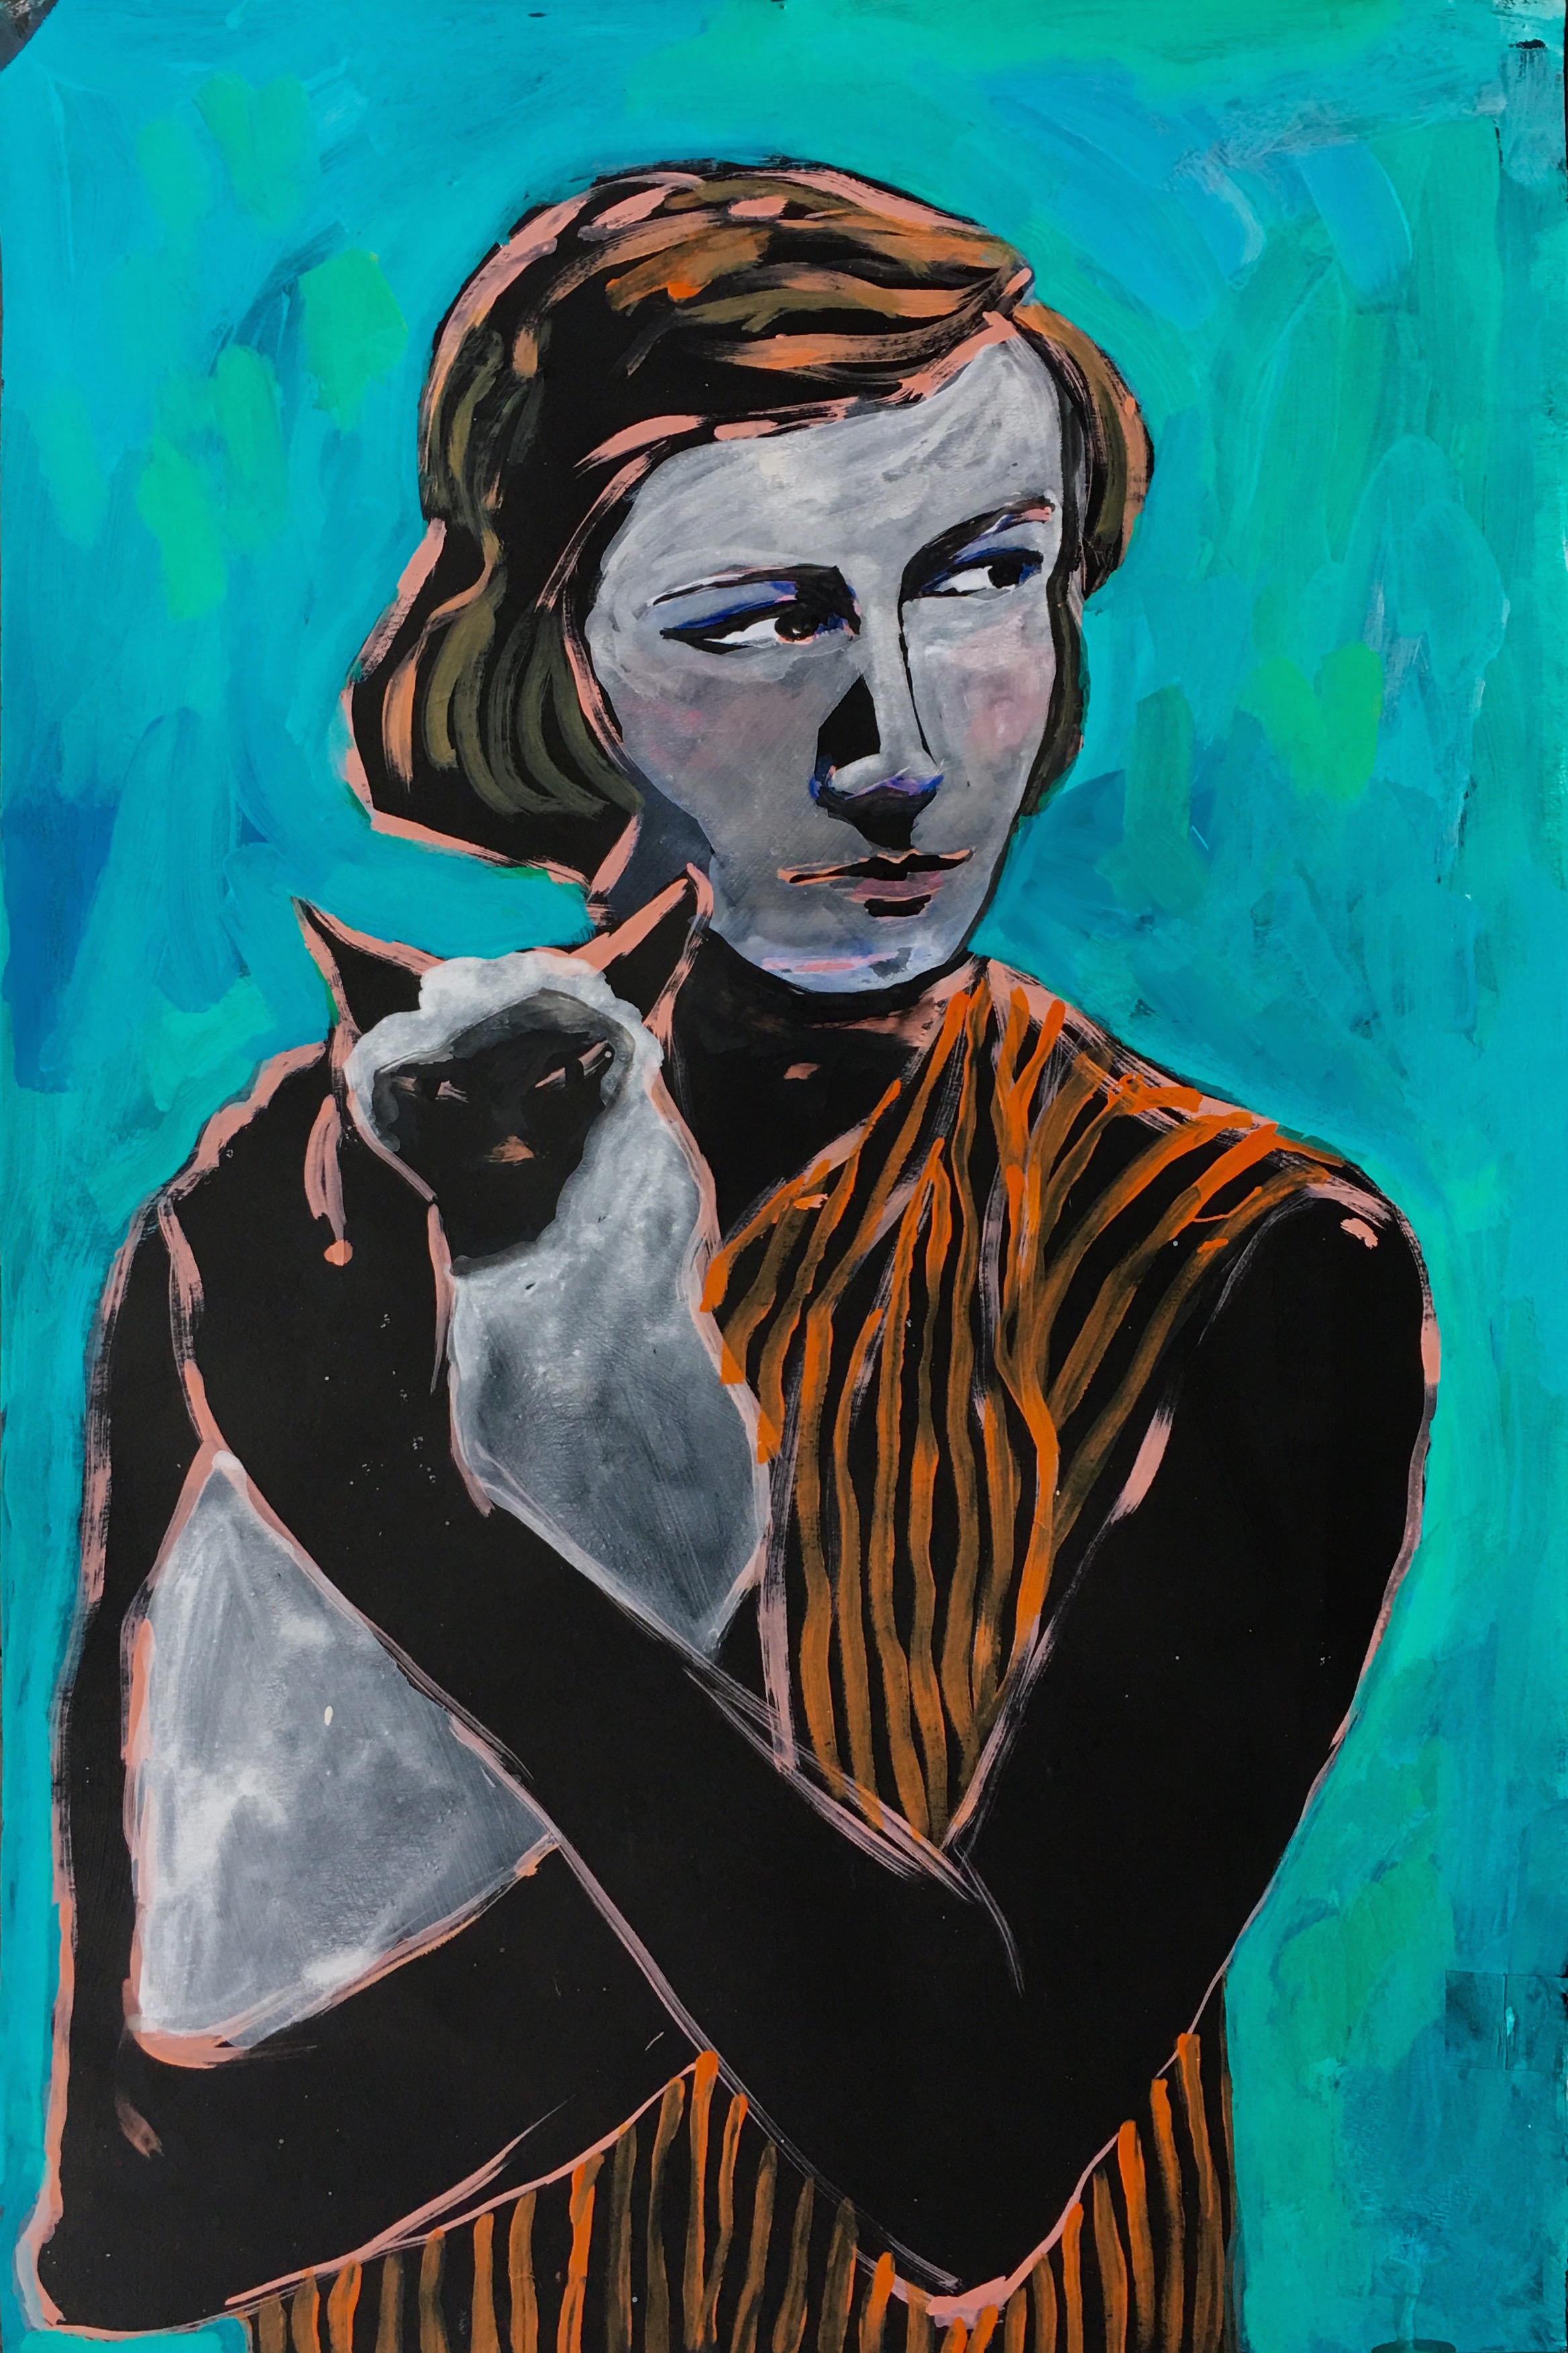   “At What Price” Patricia Highsmith   acrylic, watercolor, gouache on paper  24&nbsp;x 16.5 inches, 2016 